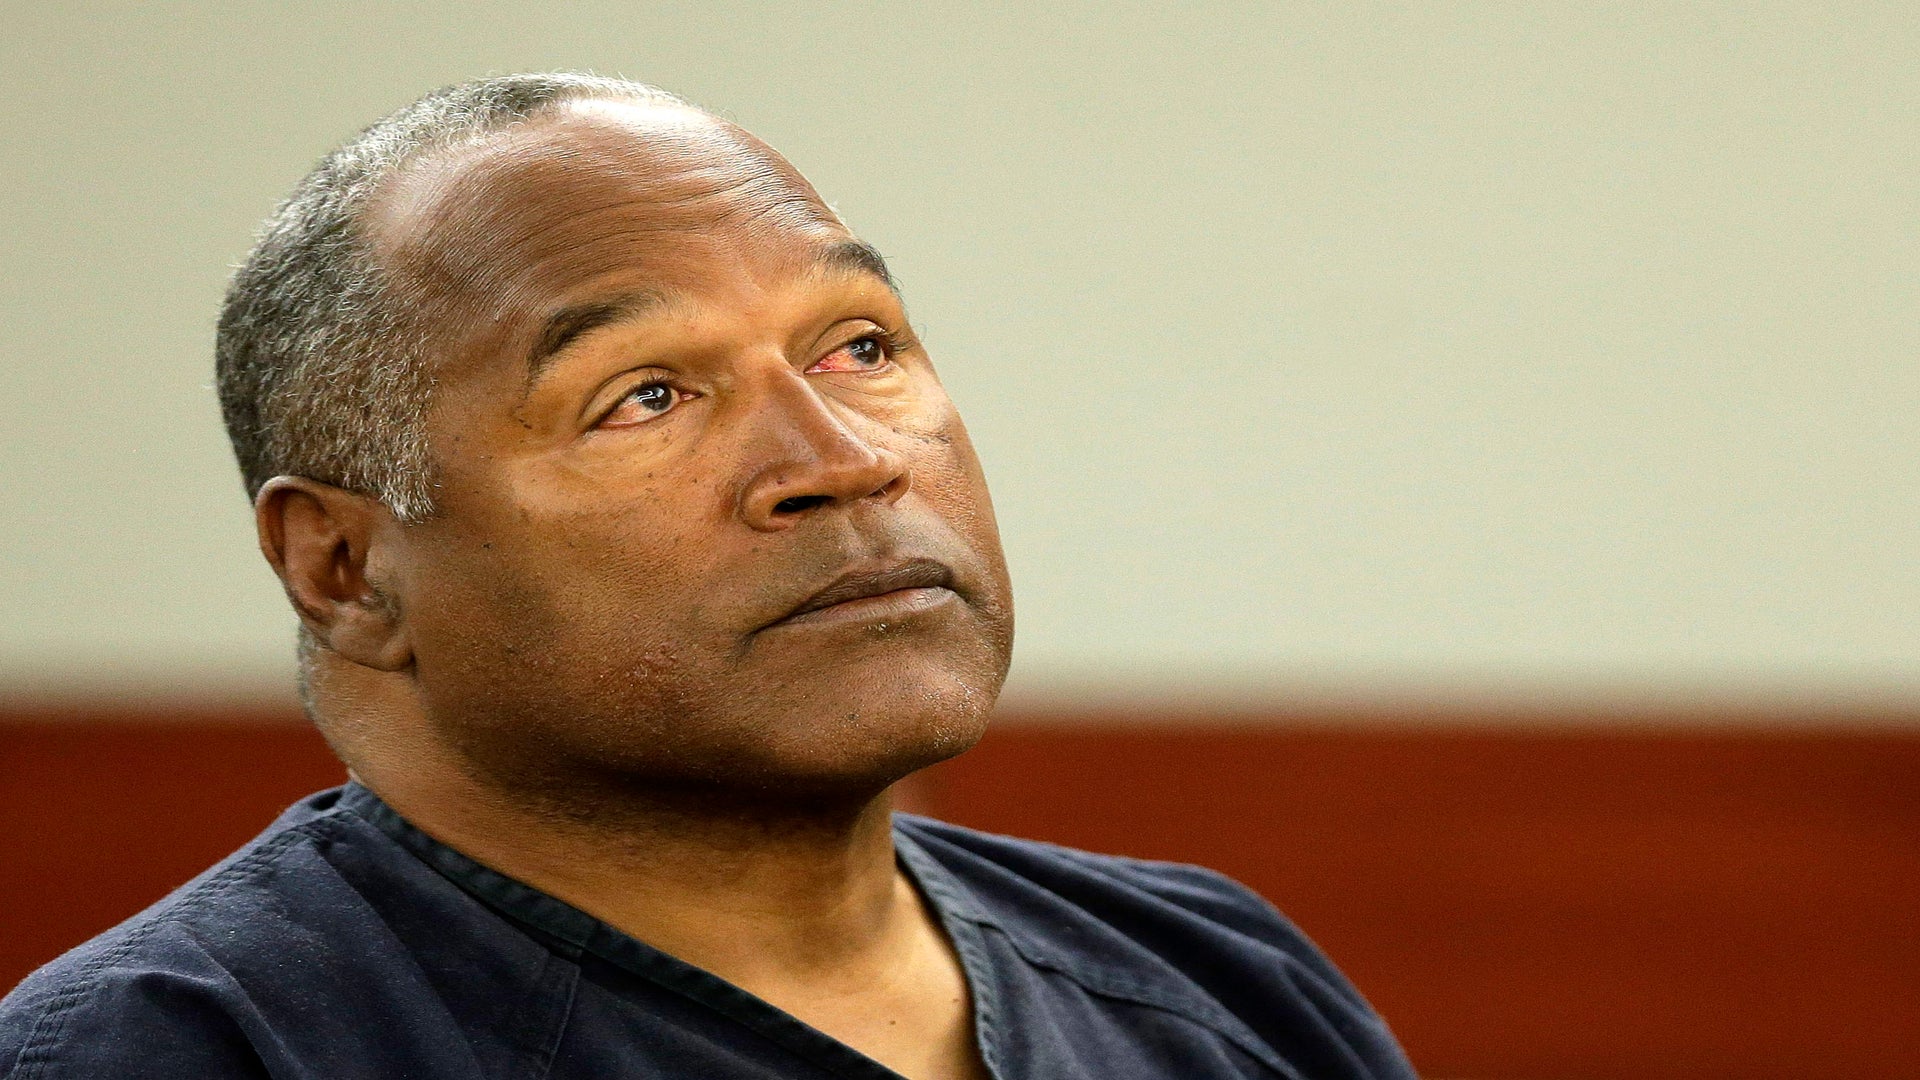 O.J. Simpson Speaks After Being Released From Prison - Essence